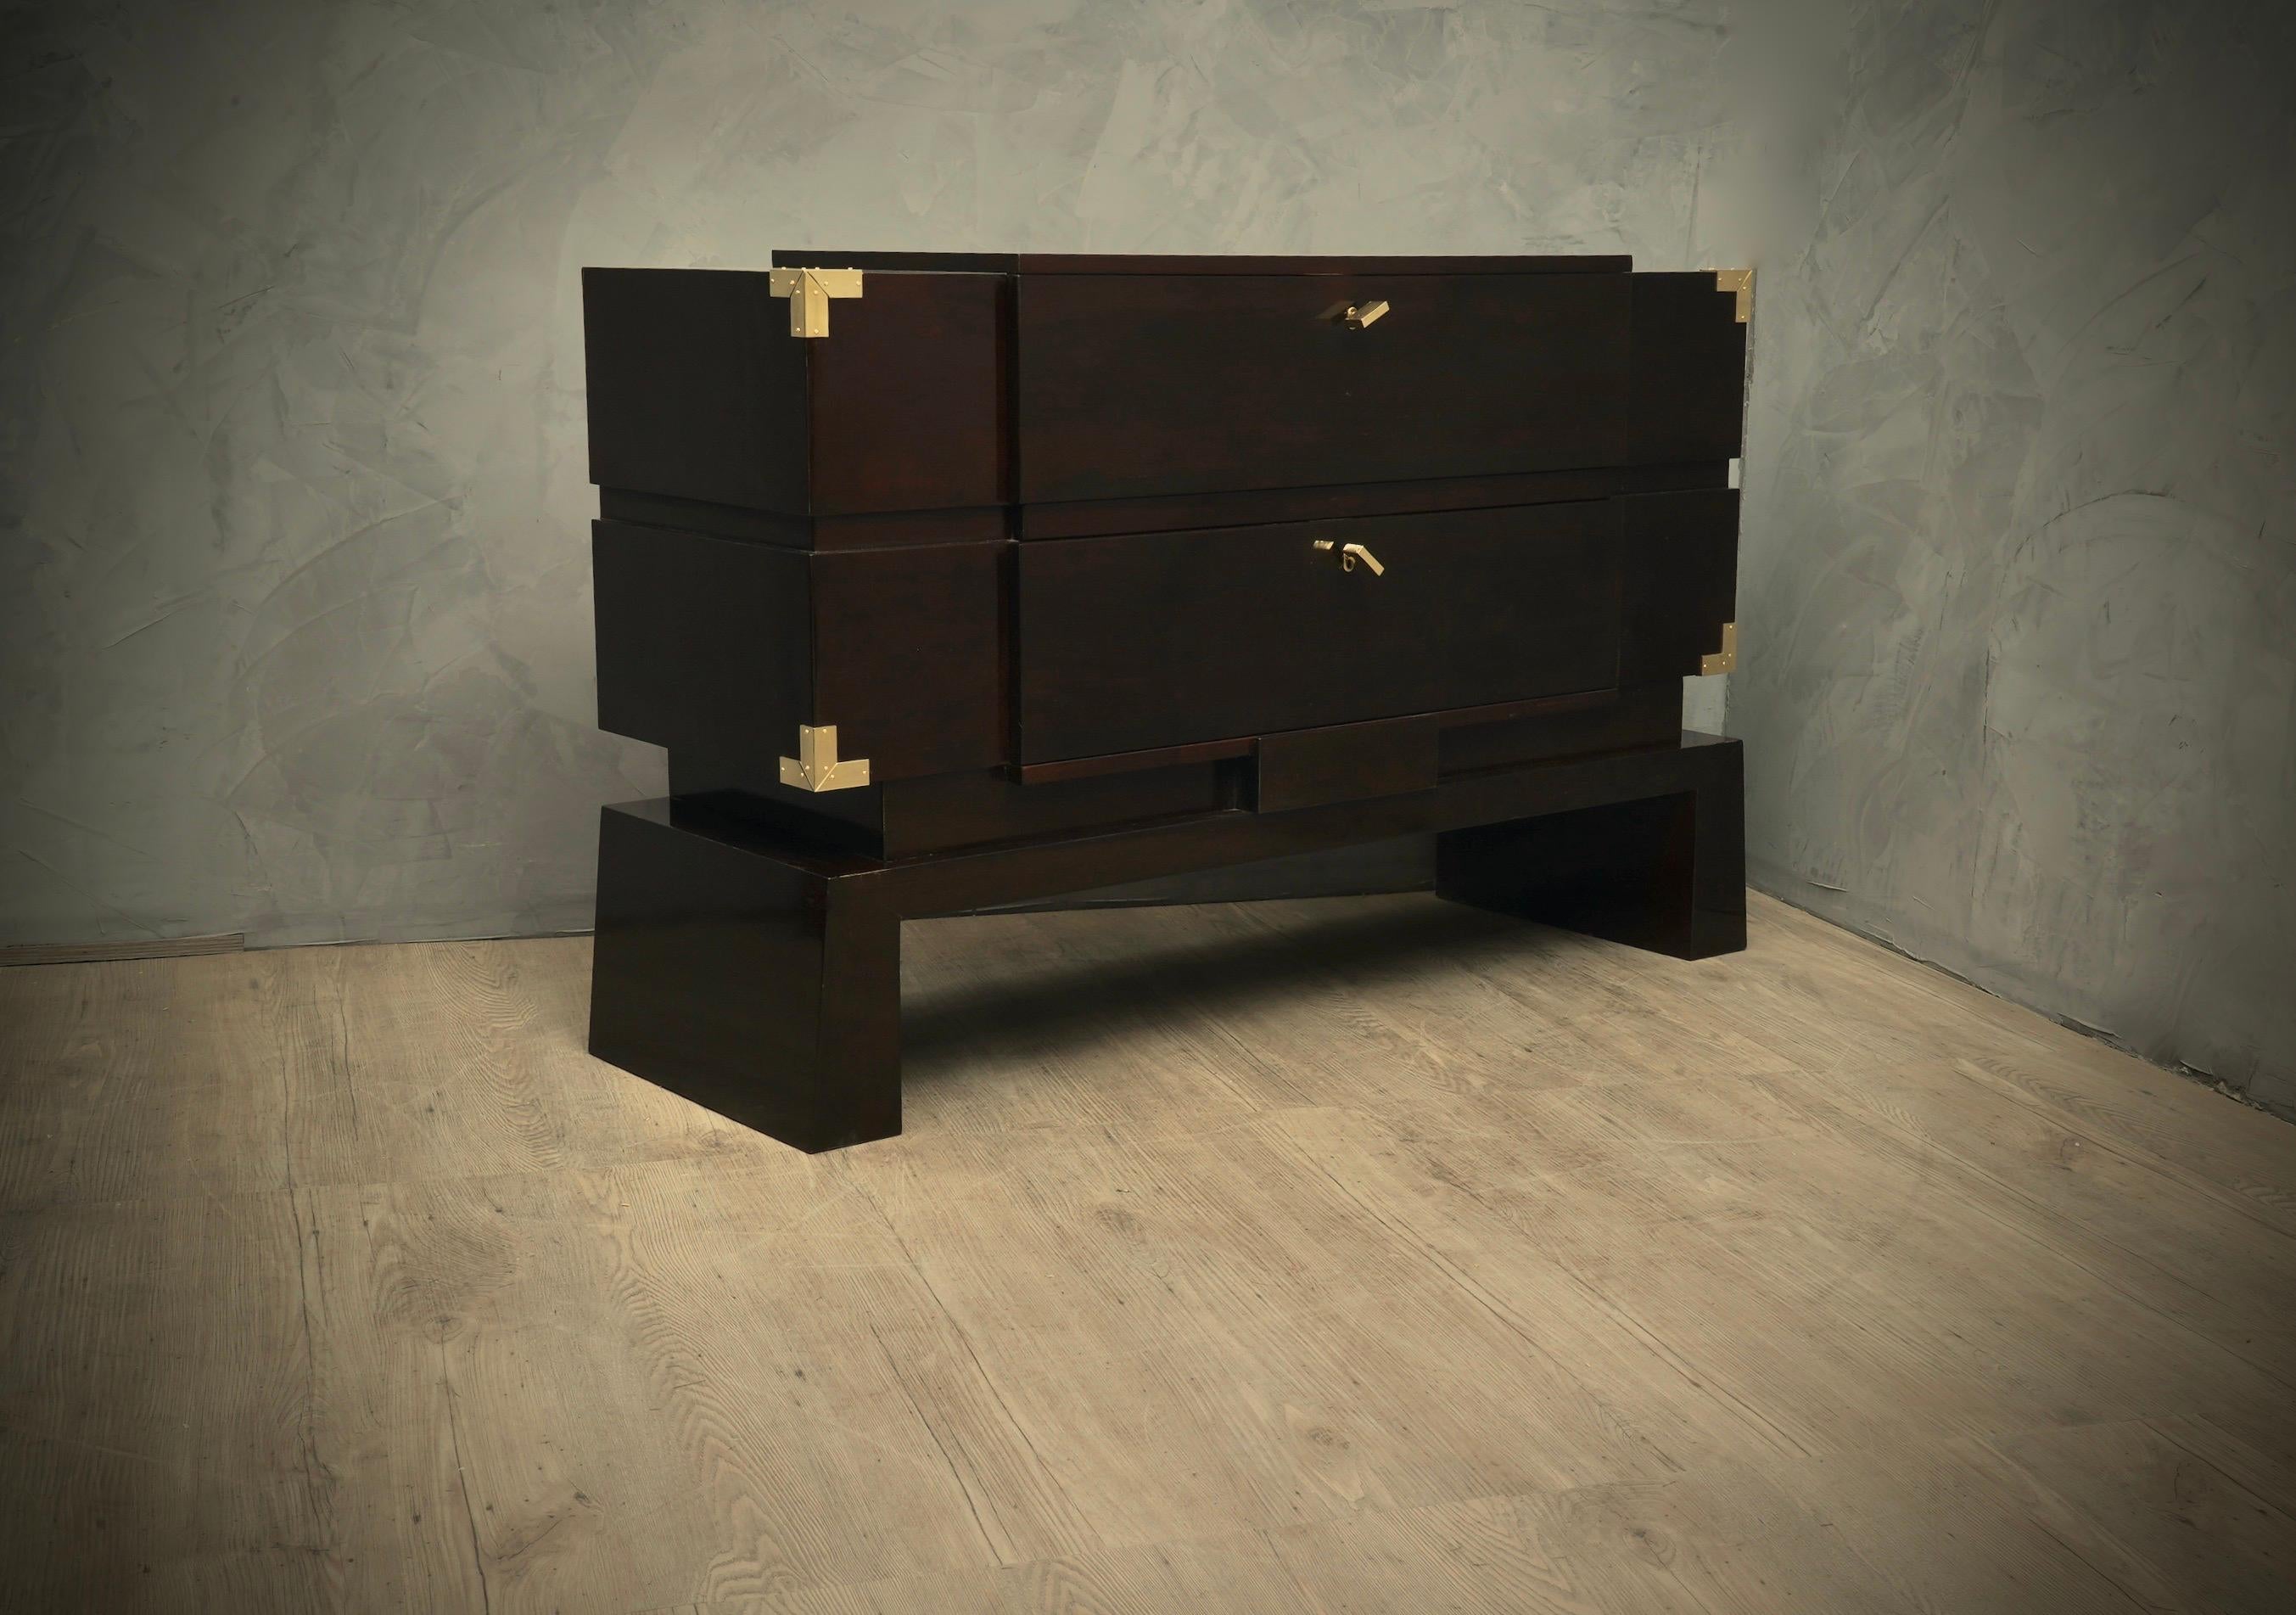 Beautiful and elegant dresser both for its articulated movement and for the perfect shellac polishing. The brass finishes match his style perfectly.

The chest of drawers is veneered in dark mahogany stained walnut wood, with a perfect shellac